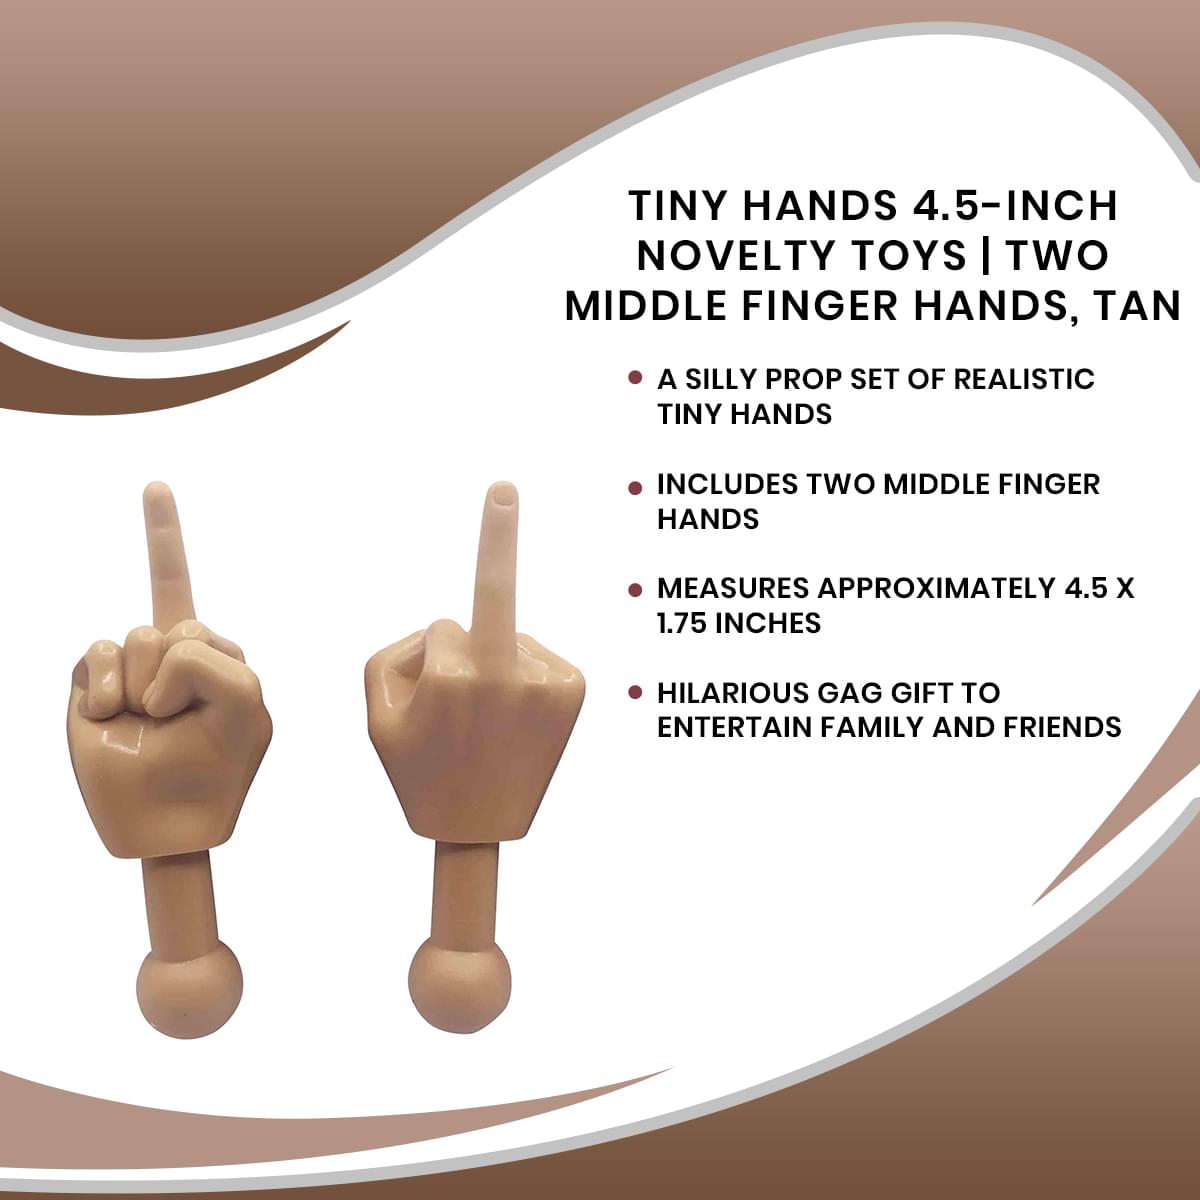 Tiny Hands 4.5-Inch Novelty Toys | Two Middle Finger Hands, Tan